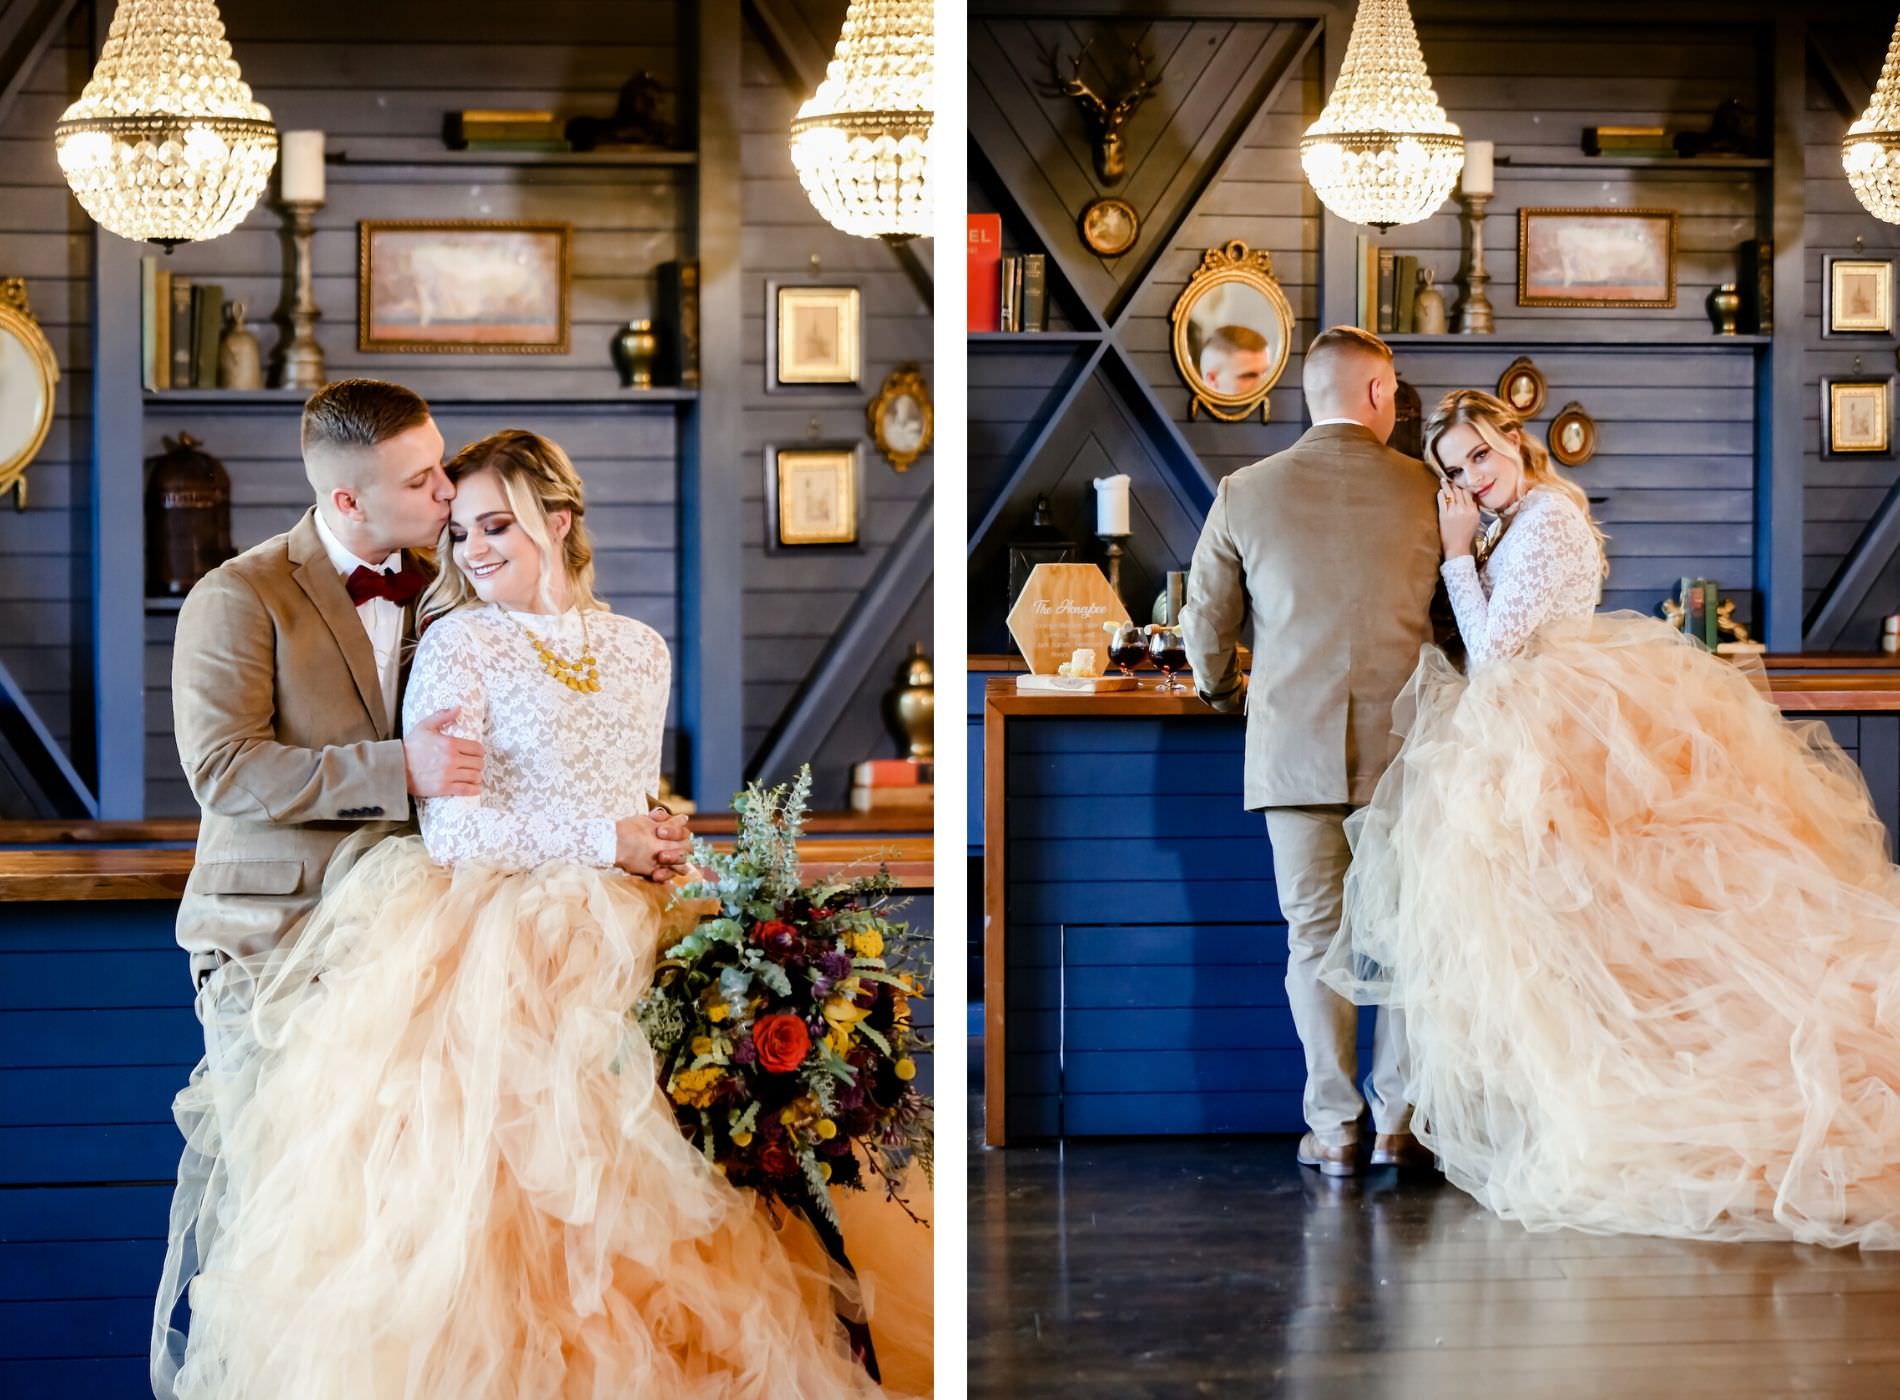 Vintage Boho Chic Inspired Florida Bride and Groom Wedding Portrait, Boho Bride Wearing Oversized Blush Orange Long Tulle Skits, White Lace Long Sleeve Top, Holding Vintage Wildflower Bouquet, with Orange, Purple, Yellow, Red, Eggplant and Ivory Floral Stems, Thistle, Roses, Groom in Neutral Brown Tux with Velvet Bowtie | Florida Wedding Planner Blue Skies Weddings and Events | Downtown St. Petersburg Wedding Photographer Lifelong Photography Studio | Unique Tampa Bay Wedding Venue Station House in DTSP